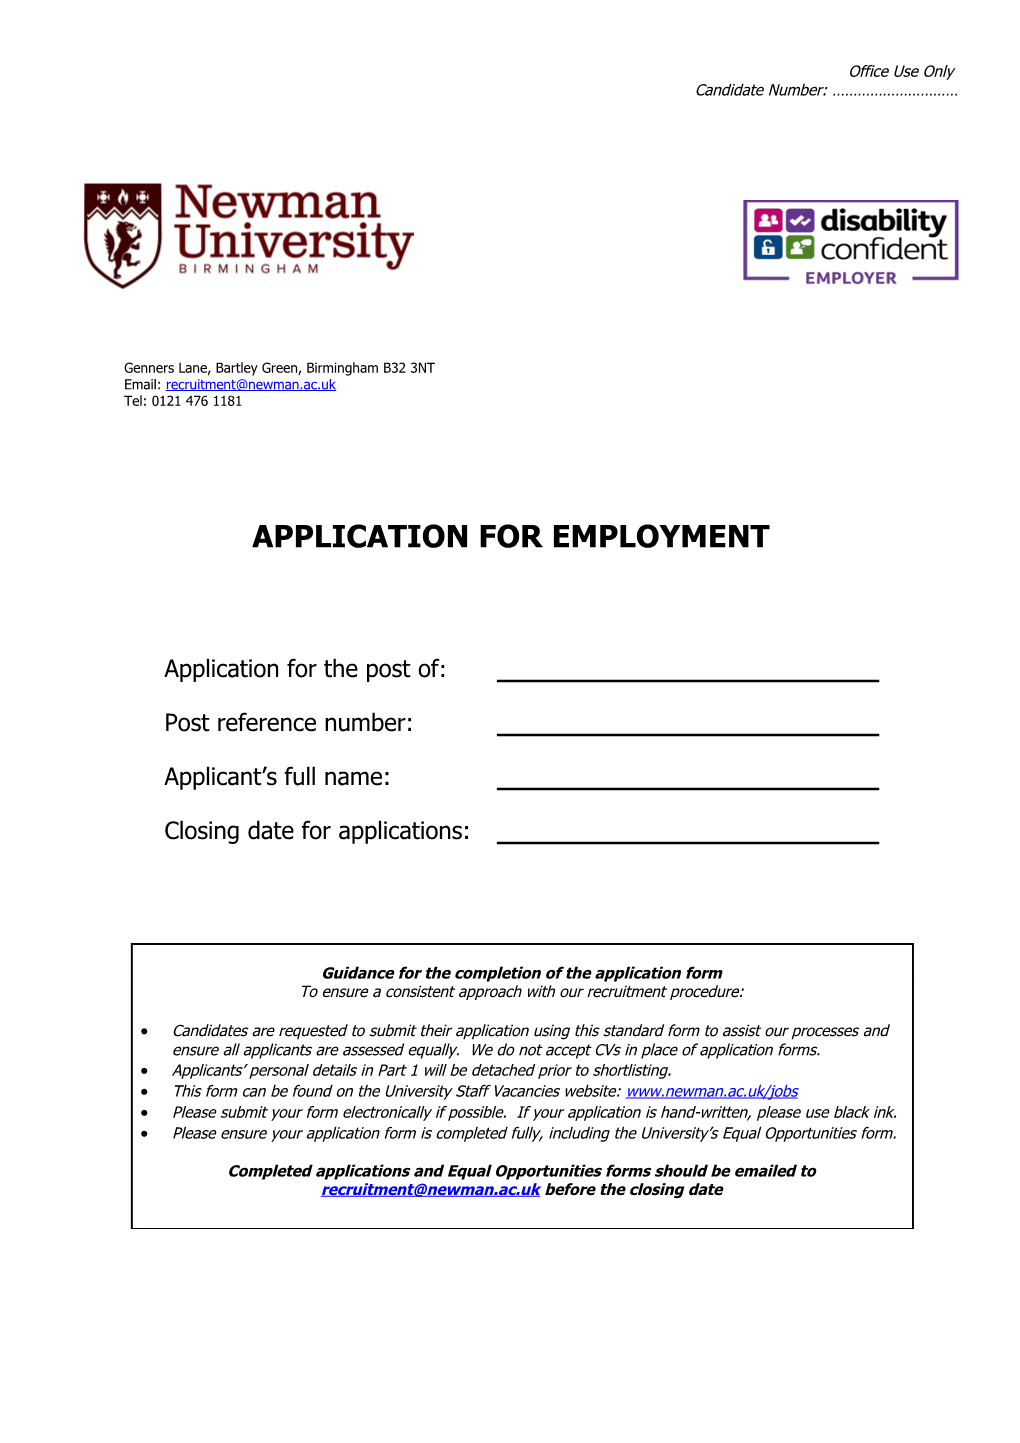 Guidance for the Completion of the Application Form